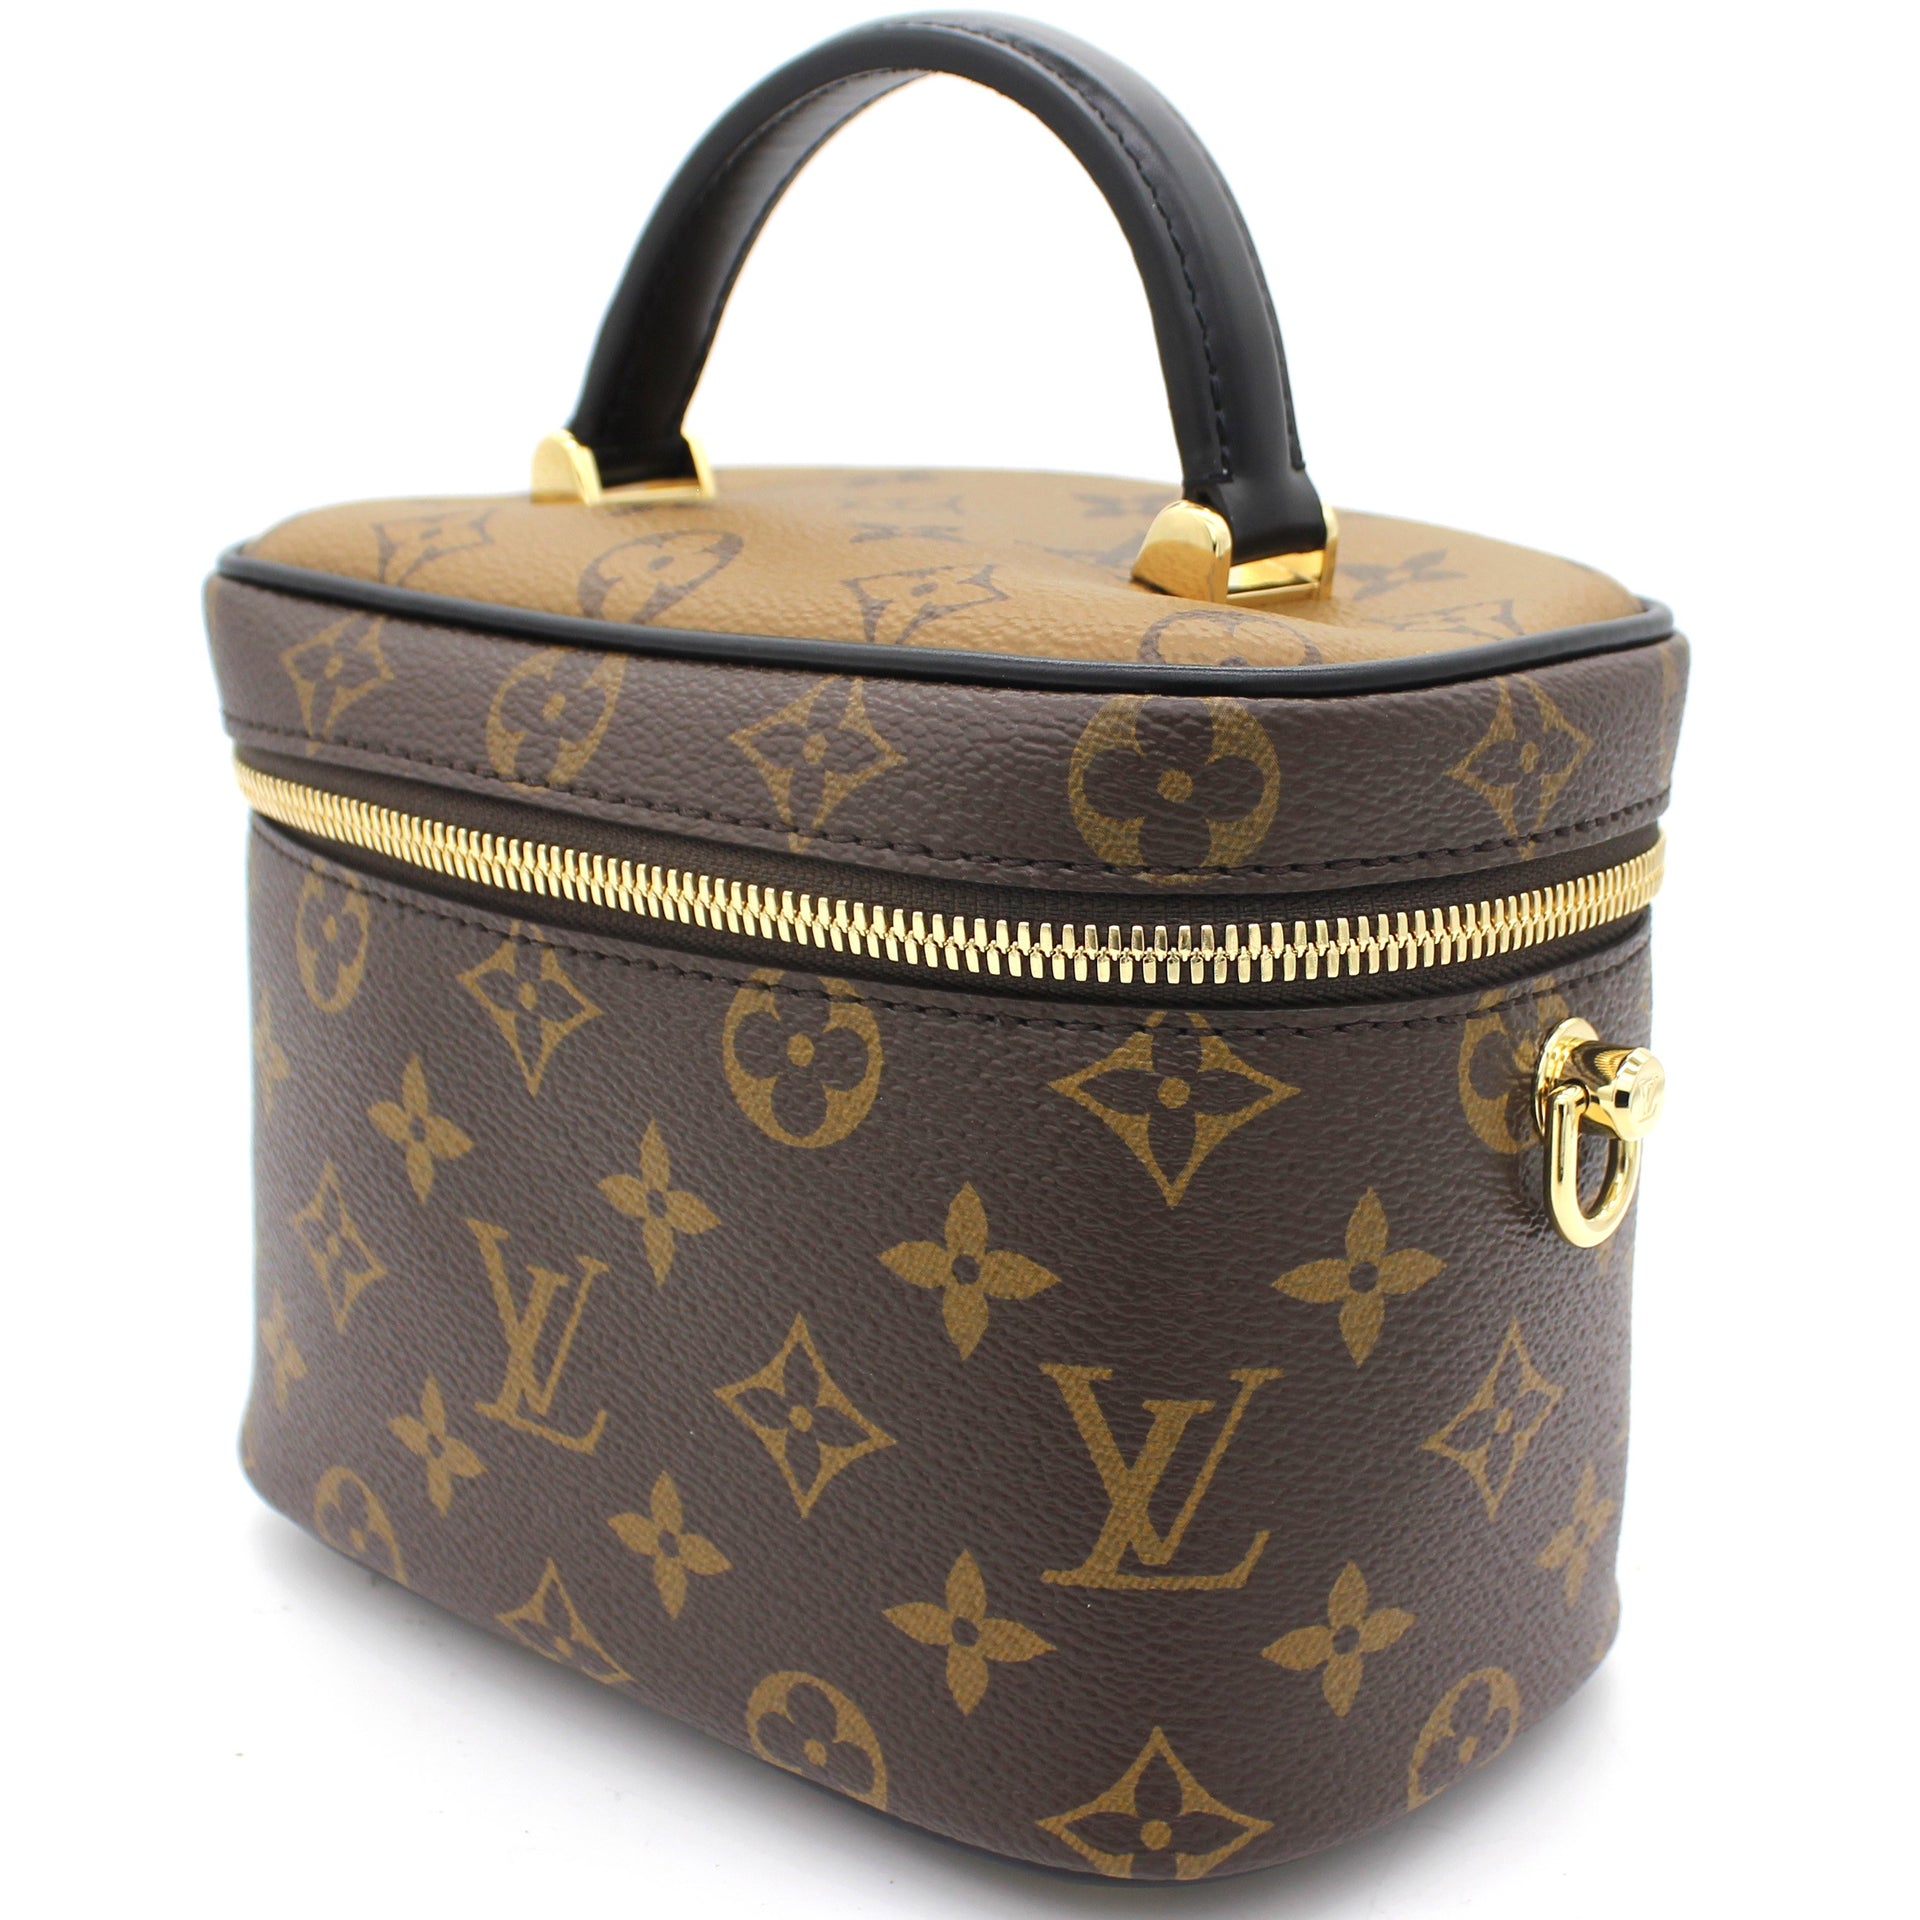 100% authentic BRAND NEW LOUIS VUITTON Monogram Spring In The City